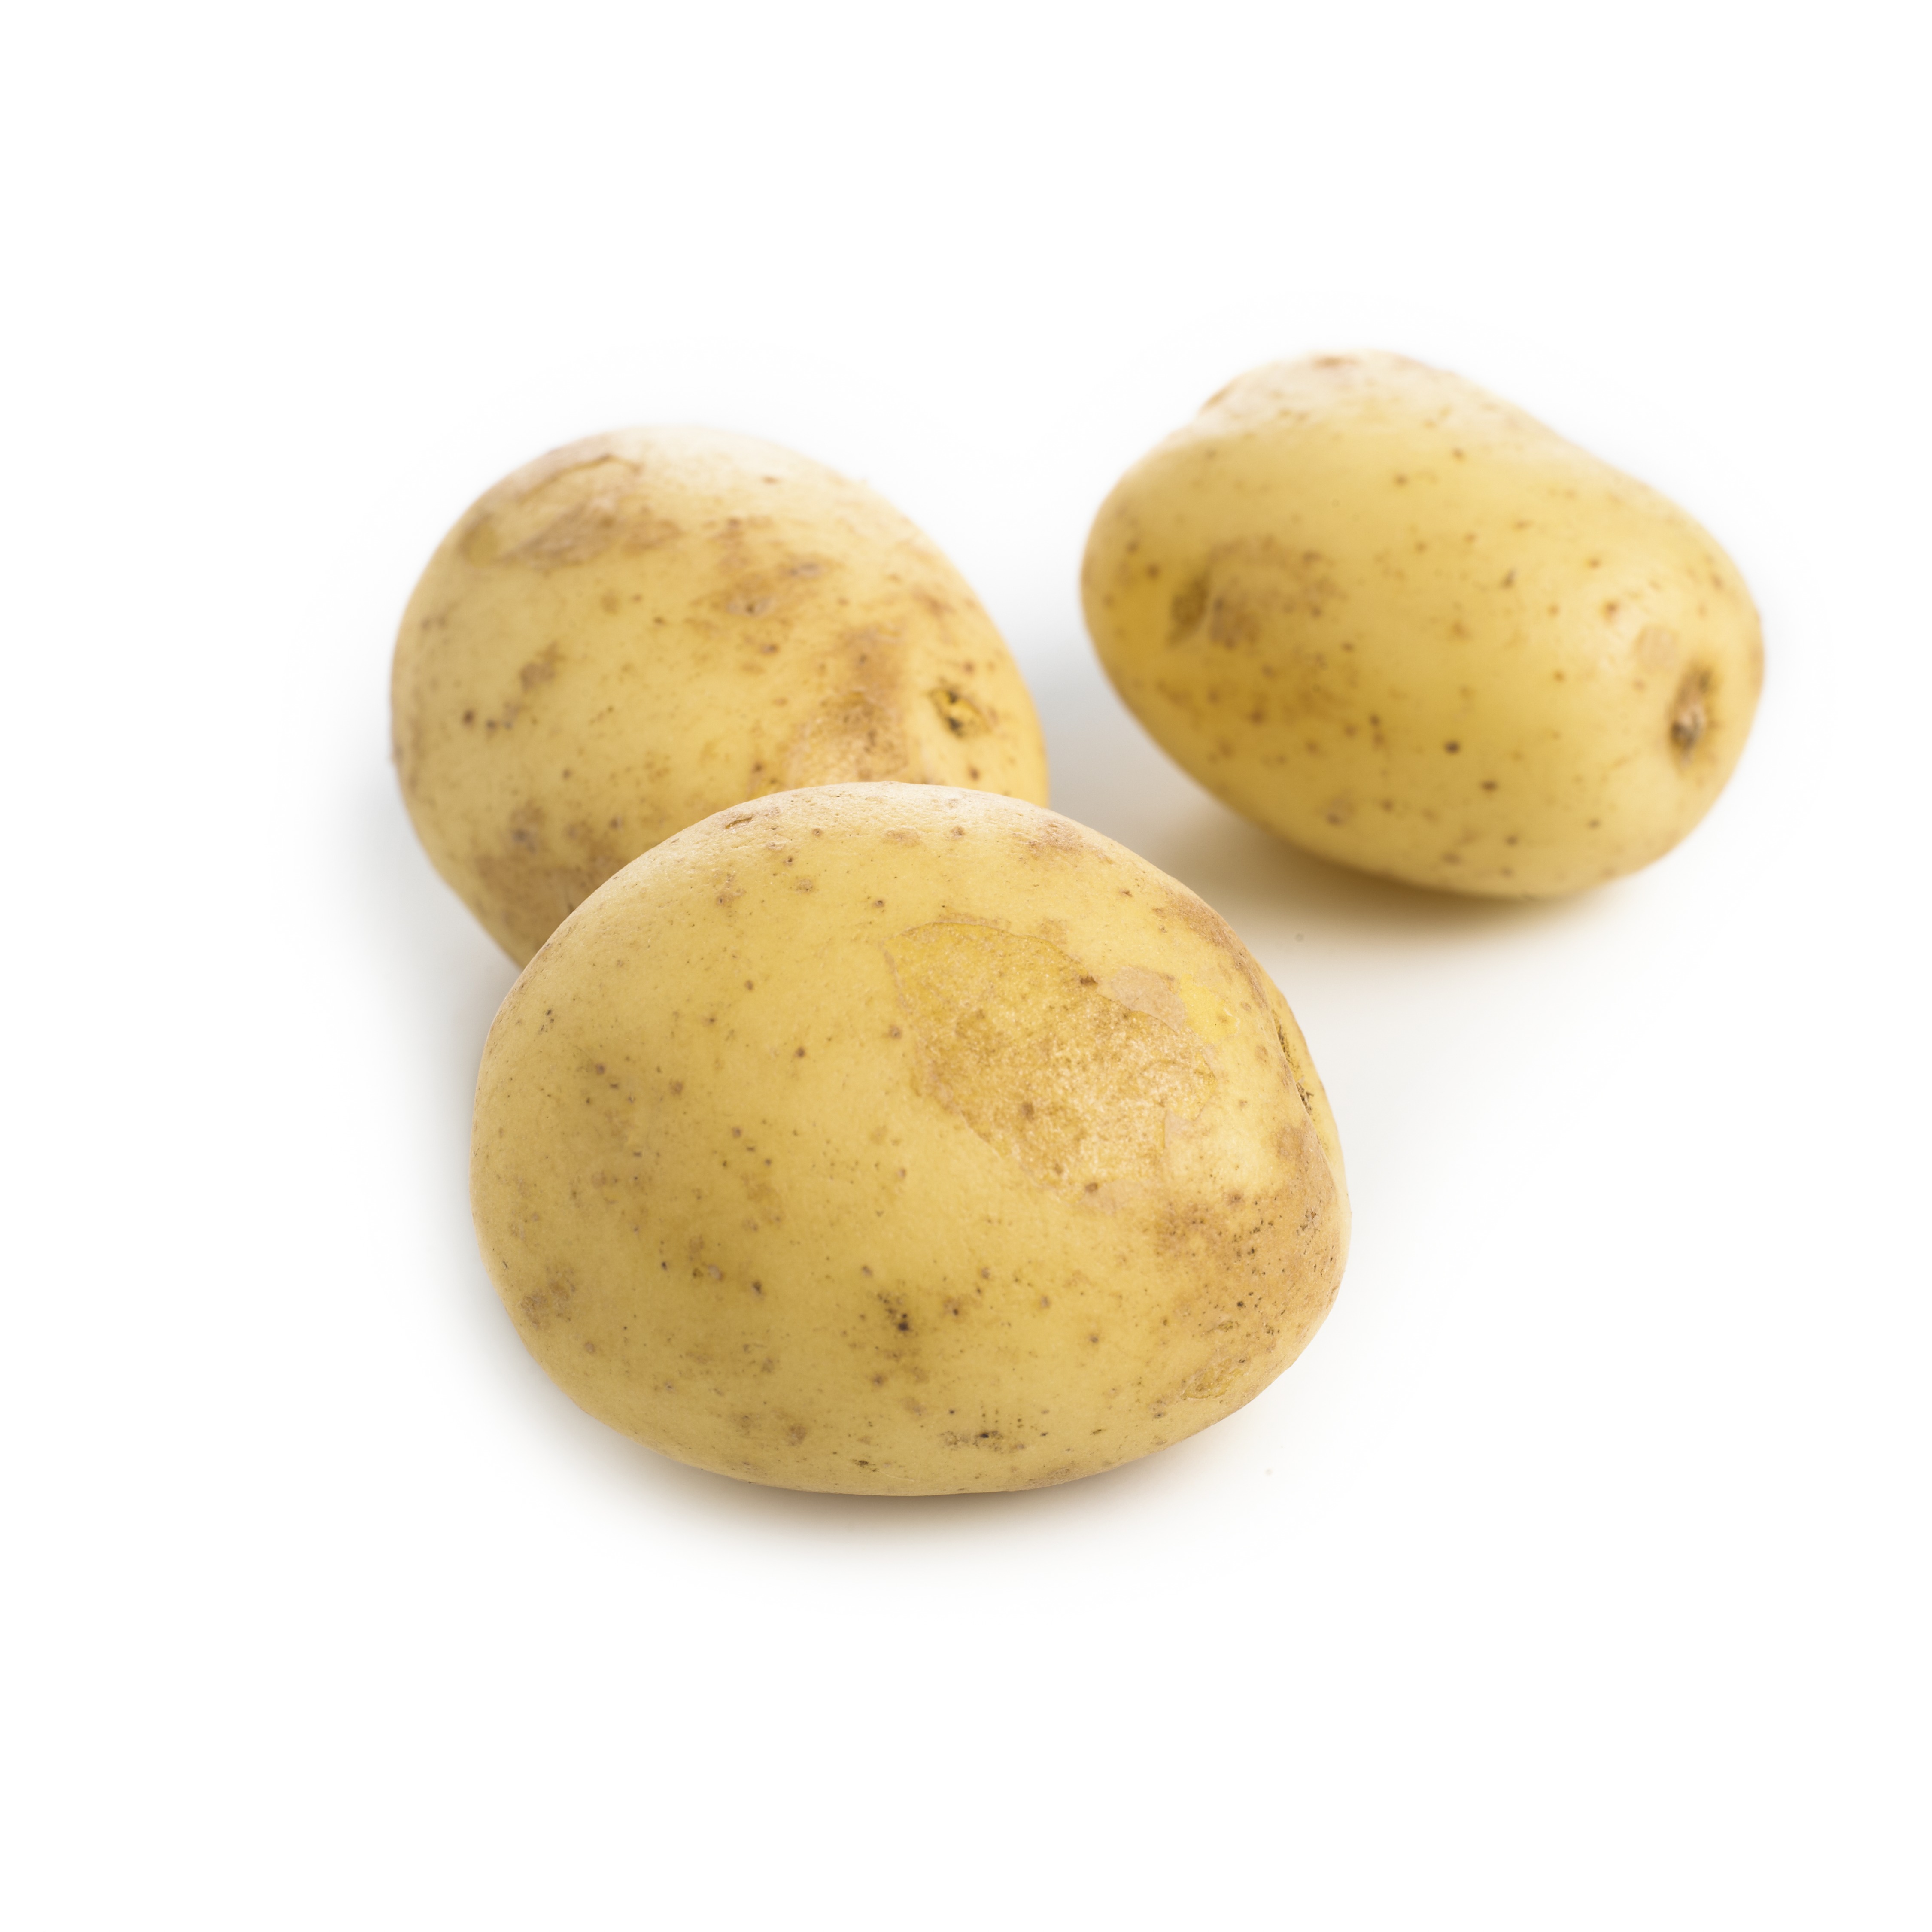 Woman Arrested After Peeing on Walmart Potatoes